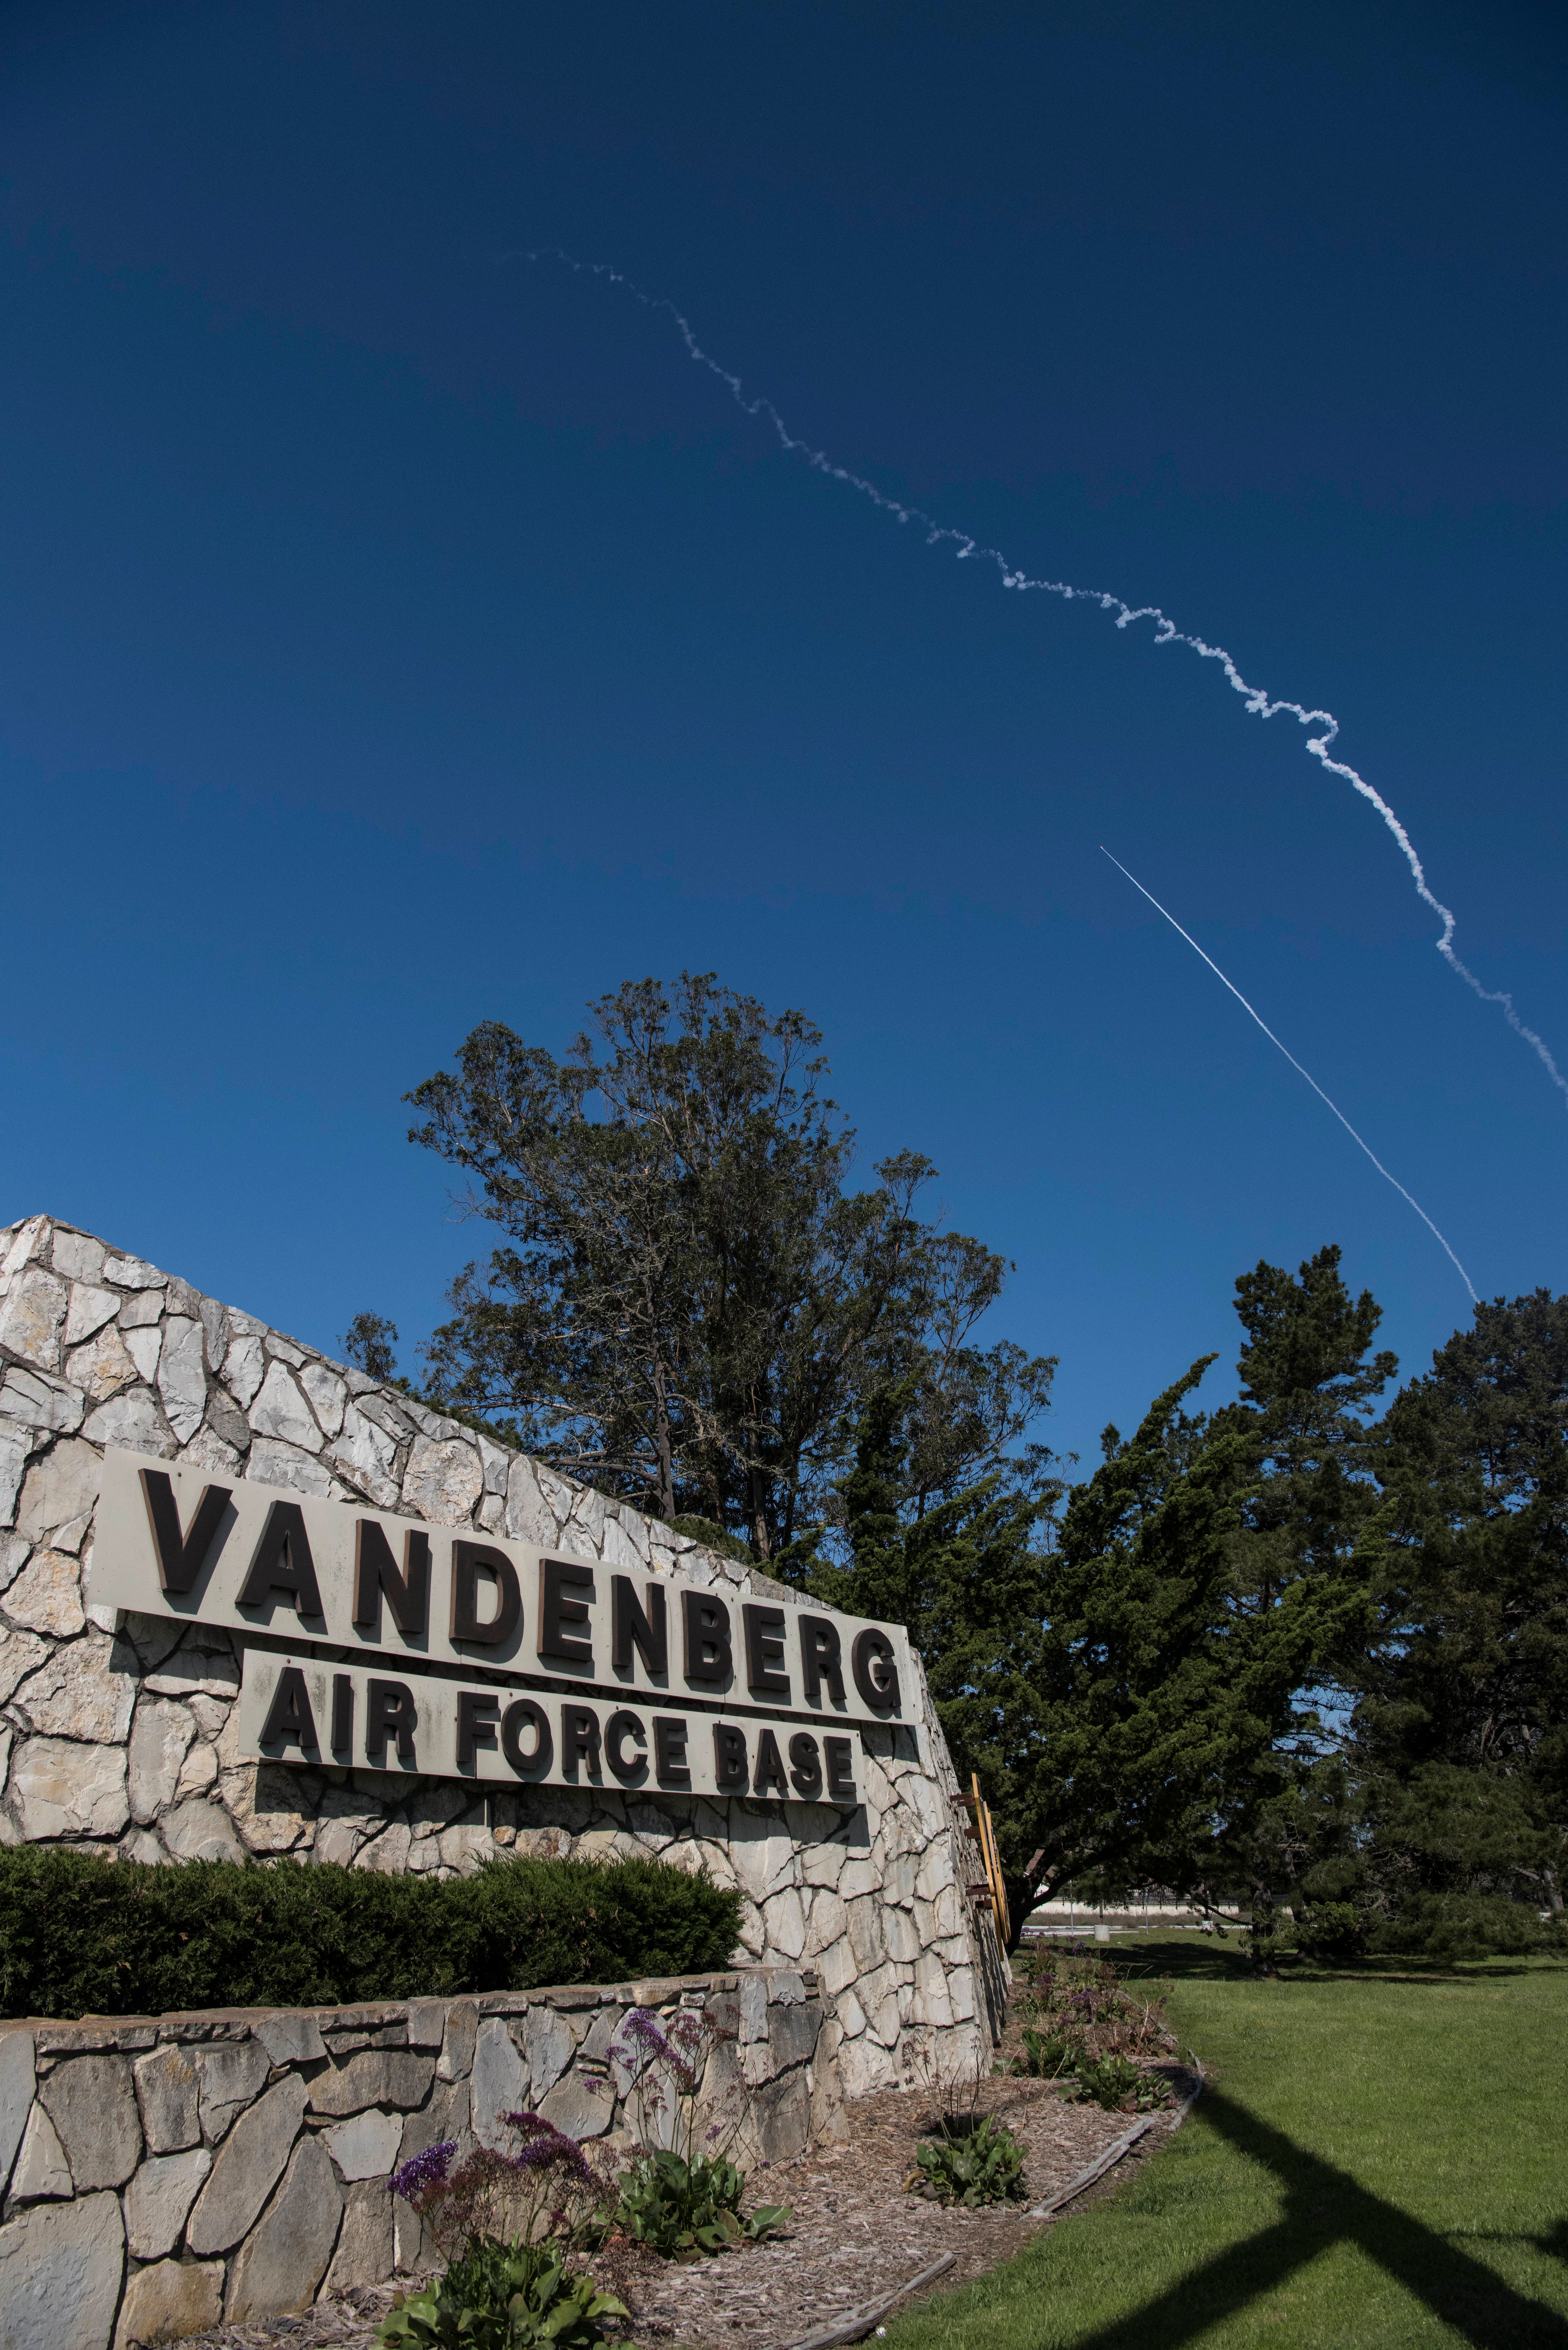 The former sign at what is now Vandenburg Space Force Base in California